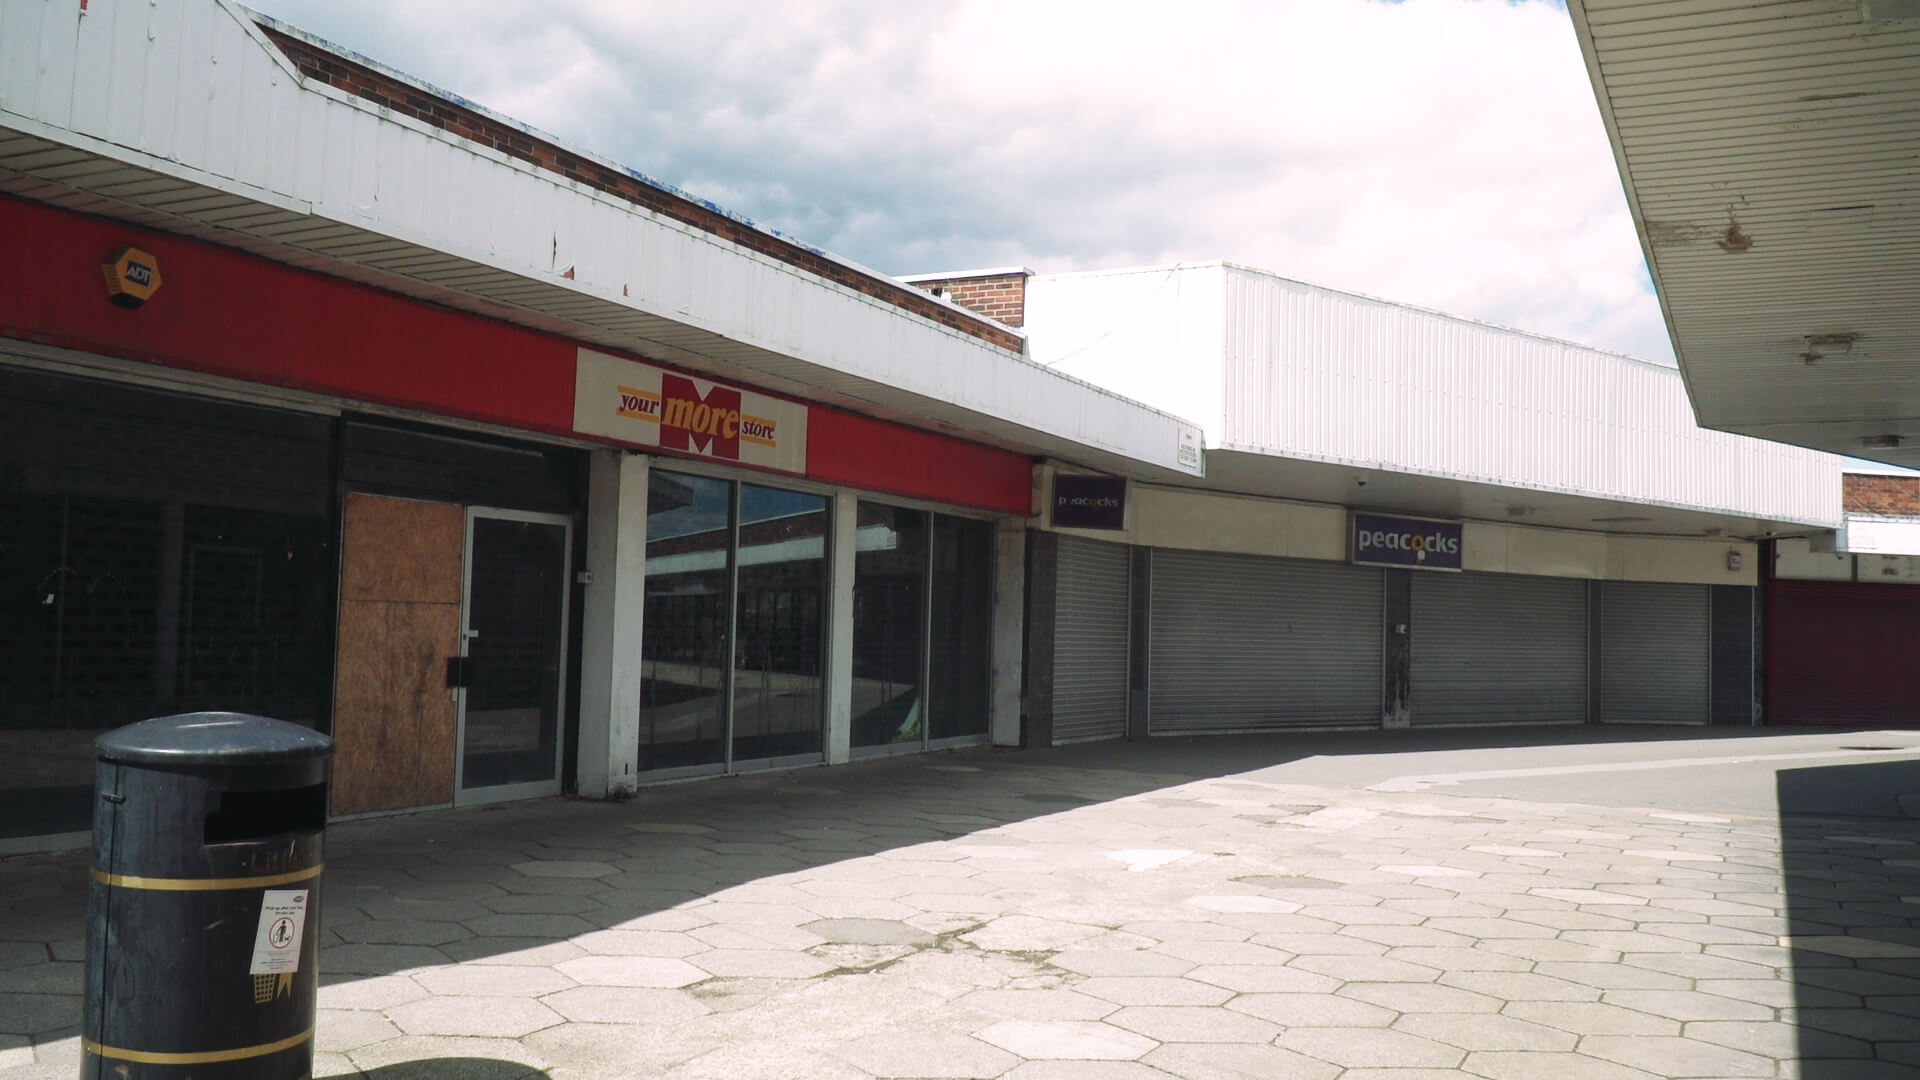 Current picture of Festival walk. It includes the 2 empty shops that were previously occupied by More store and Peacocks